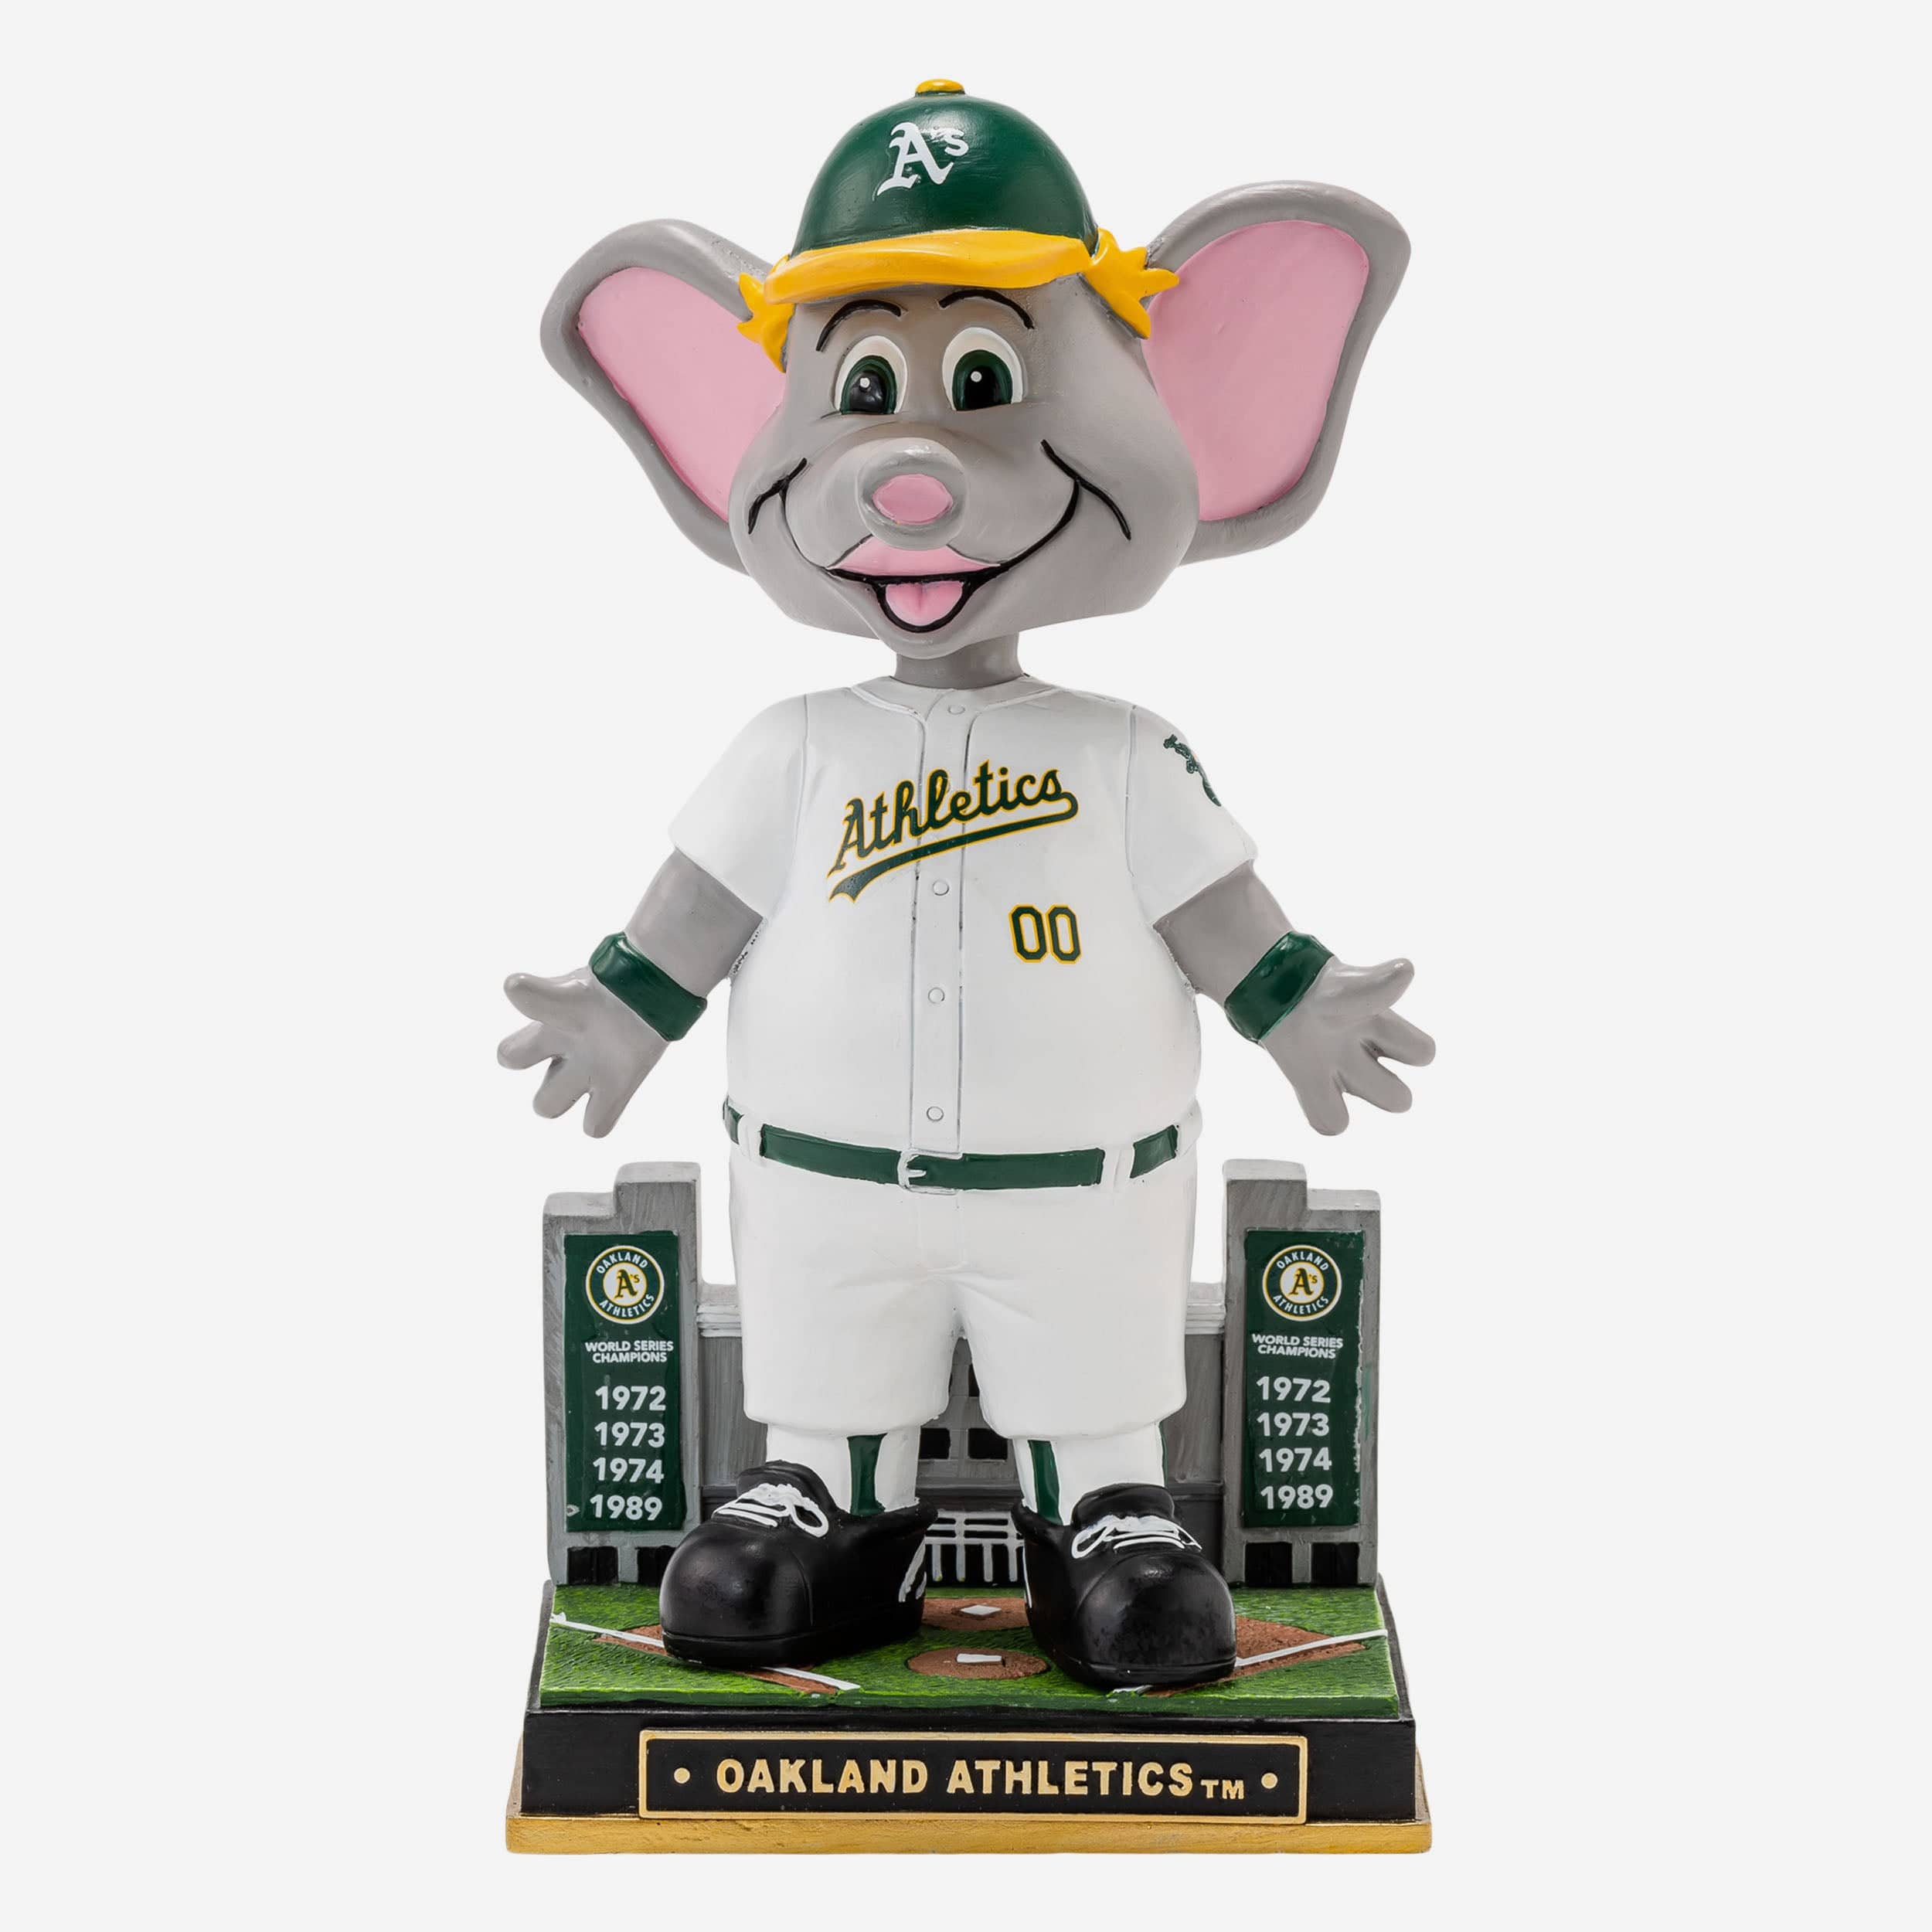 Who (what?) is Stomper, the Las Vegas A's mascot?